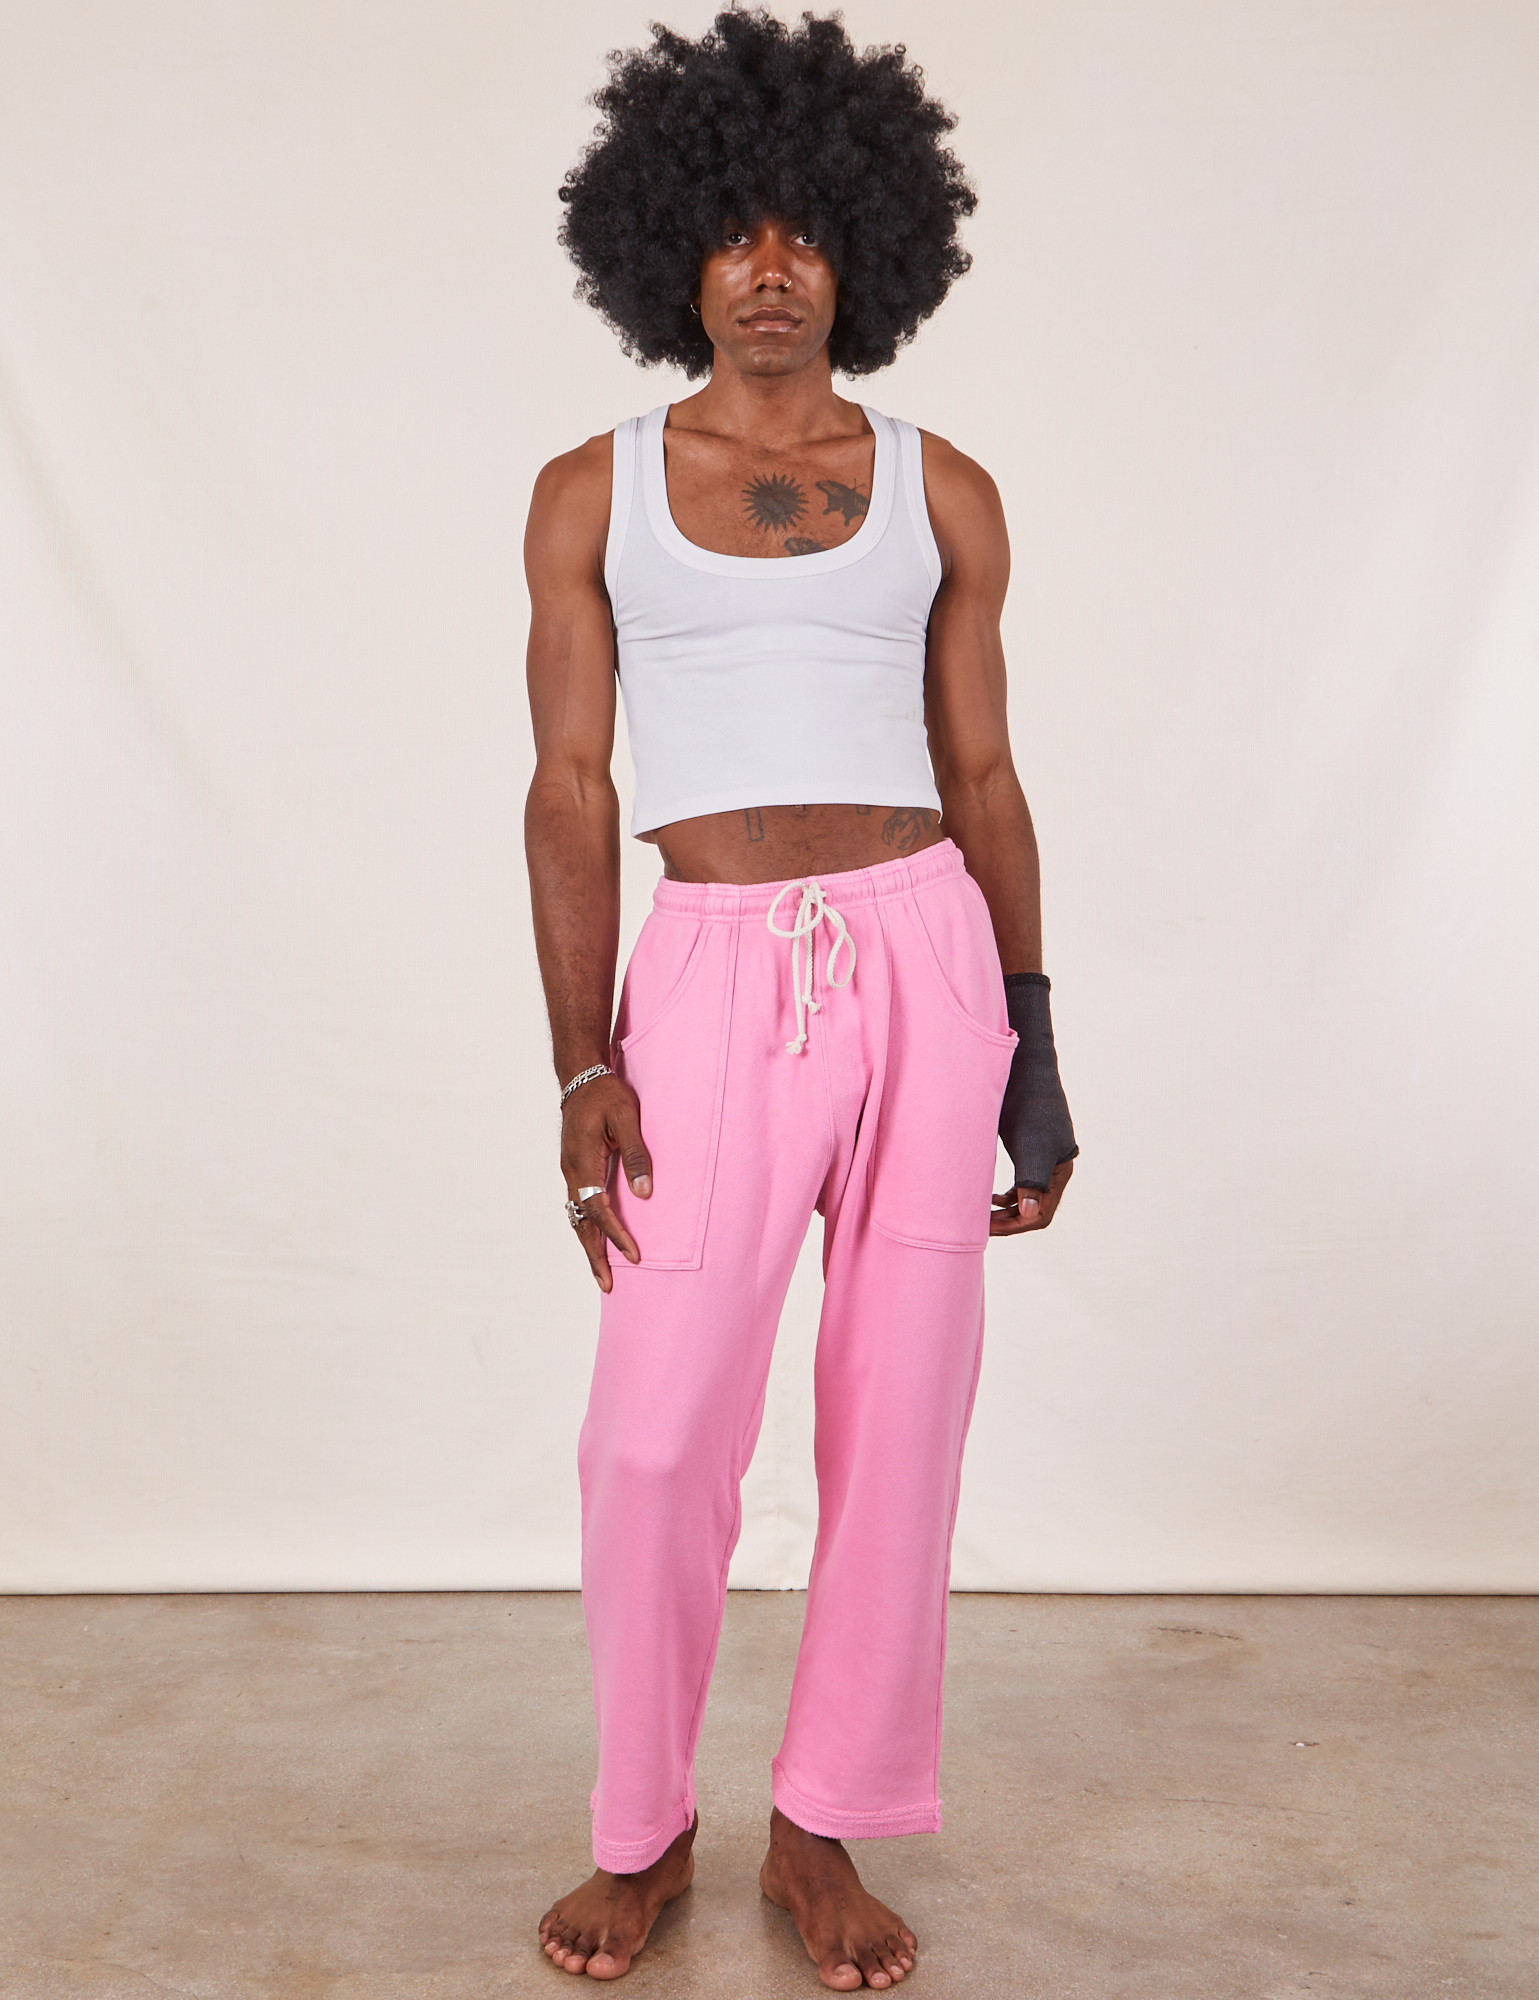 Jerrod is 6&#39;3&quot; and wearing M Cropped Rolled Cuff Sweatpants in Bubblegum Pink paired with vintage off-white Cropped Tank Top